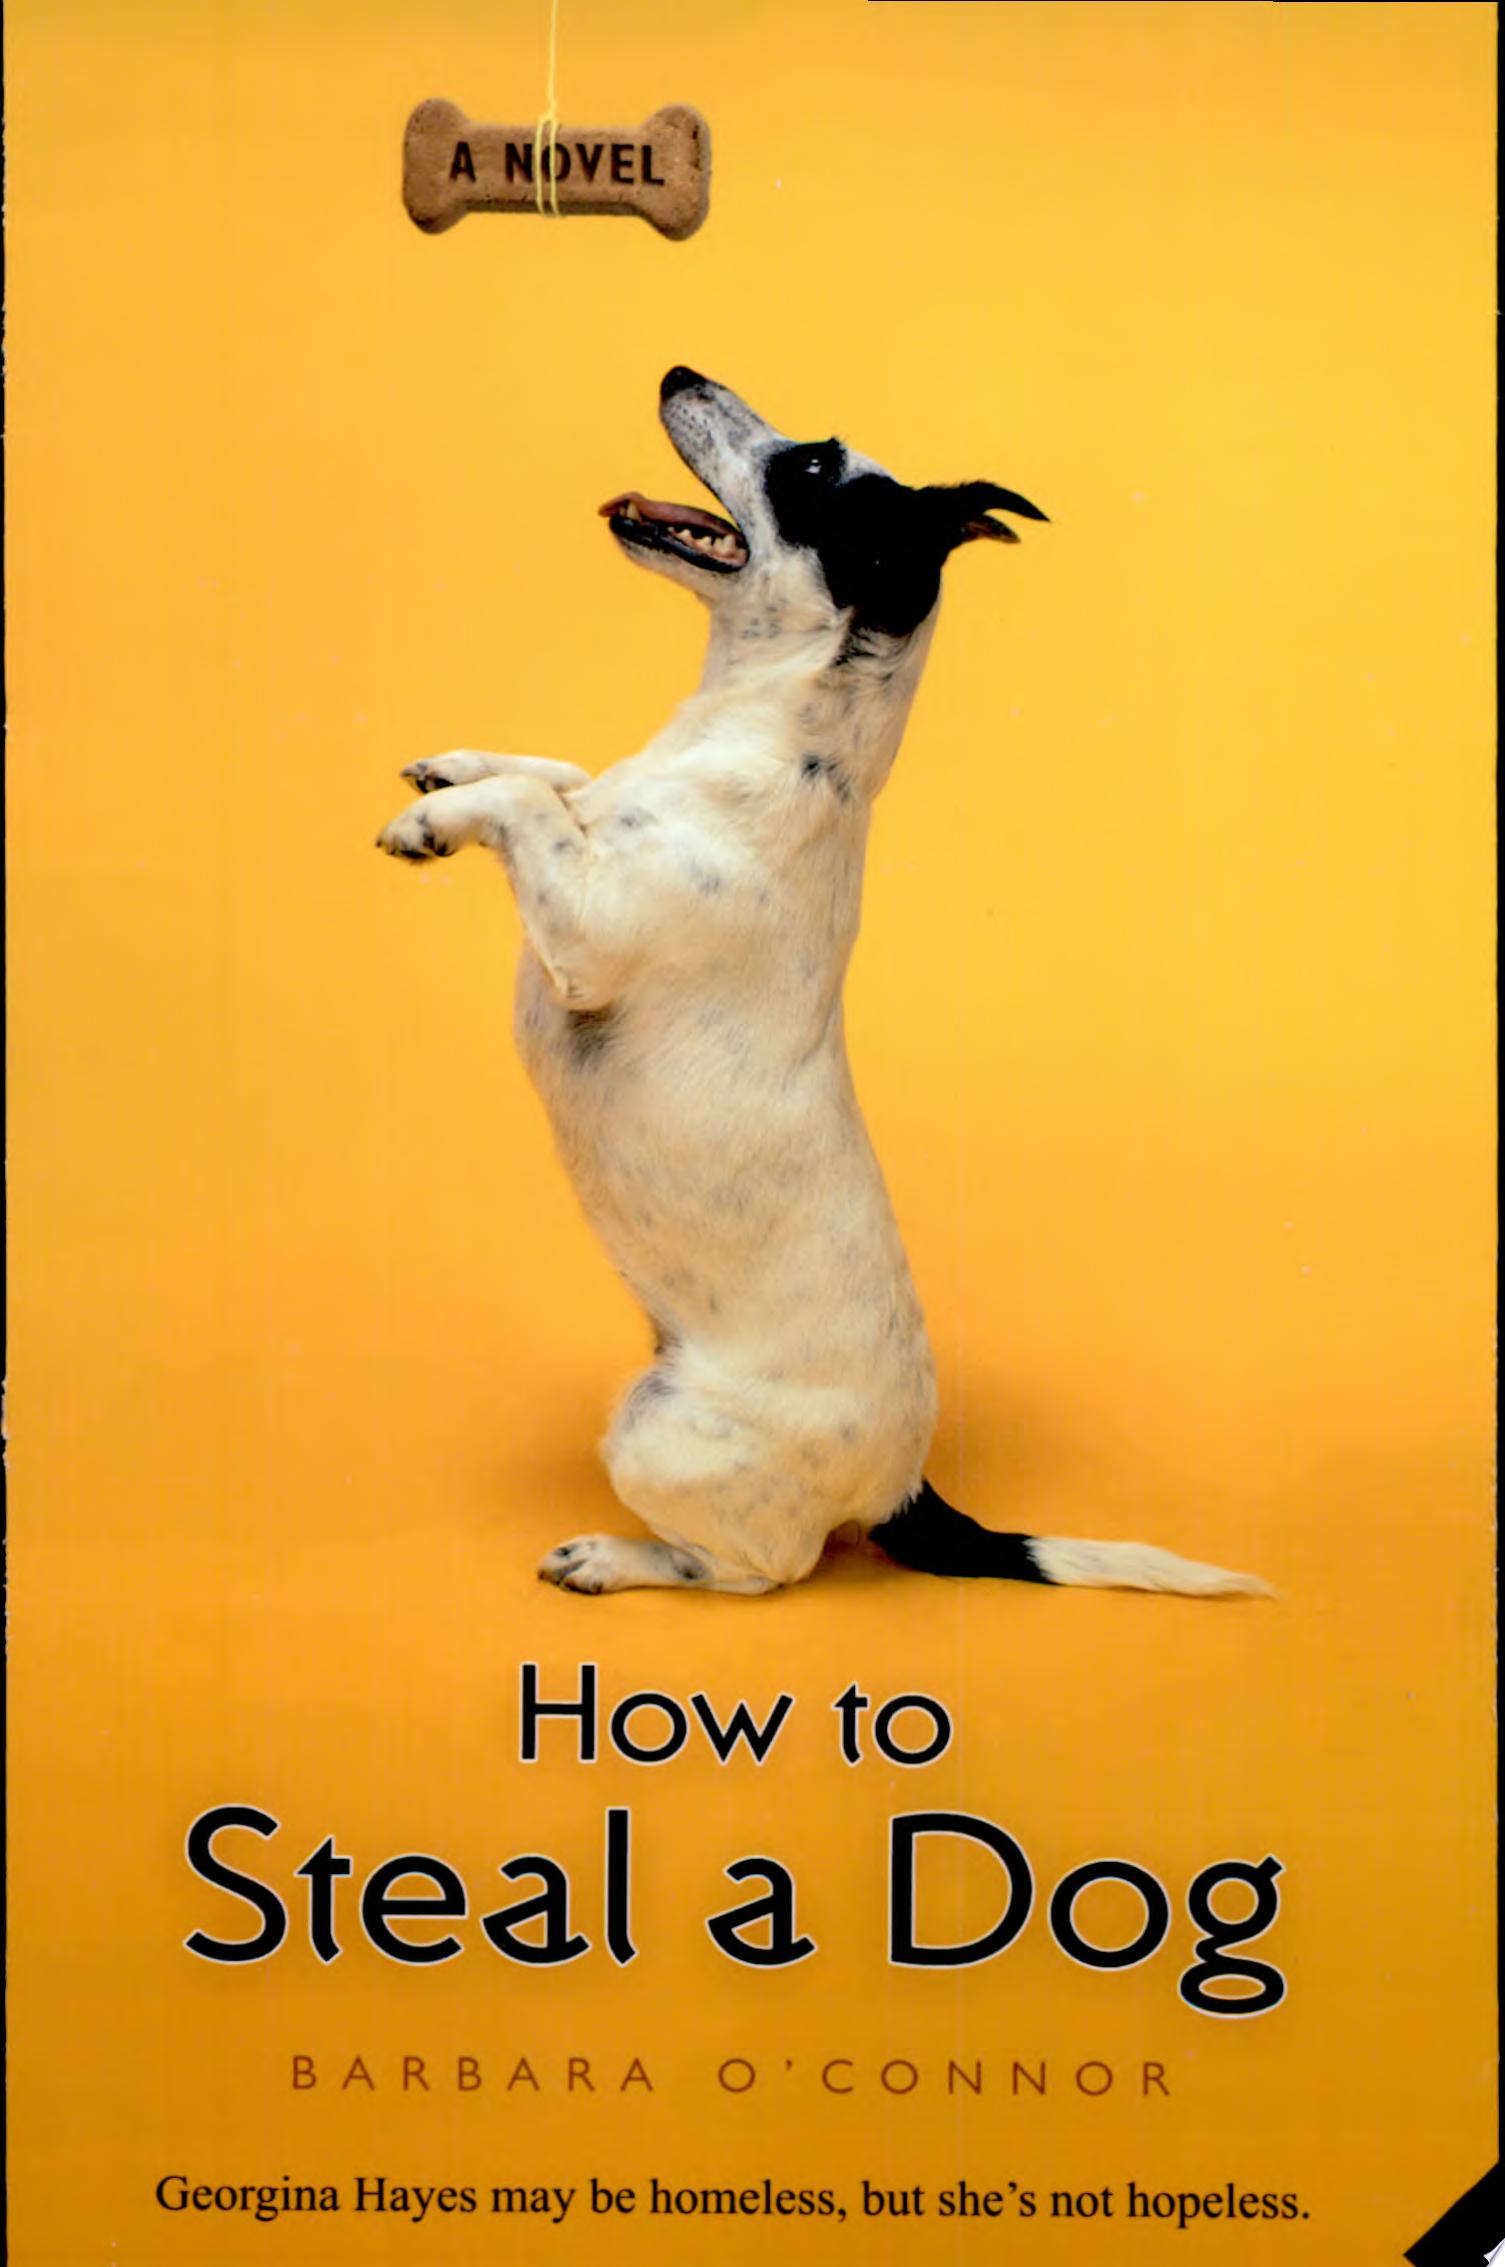 Image for "How to Steal a Dog"